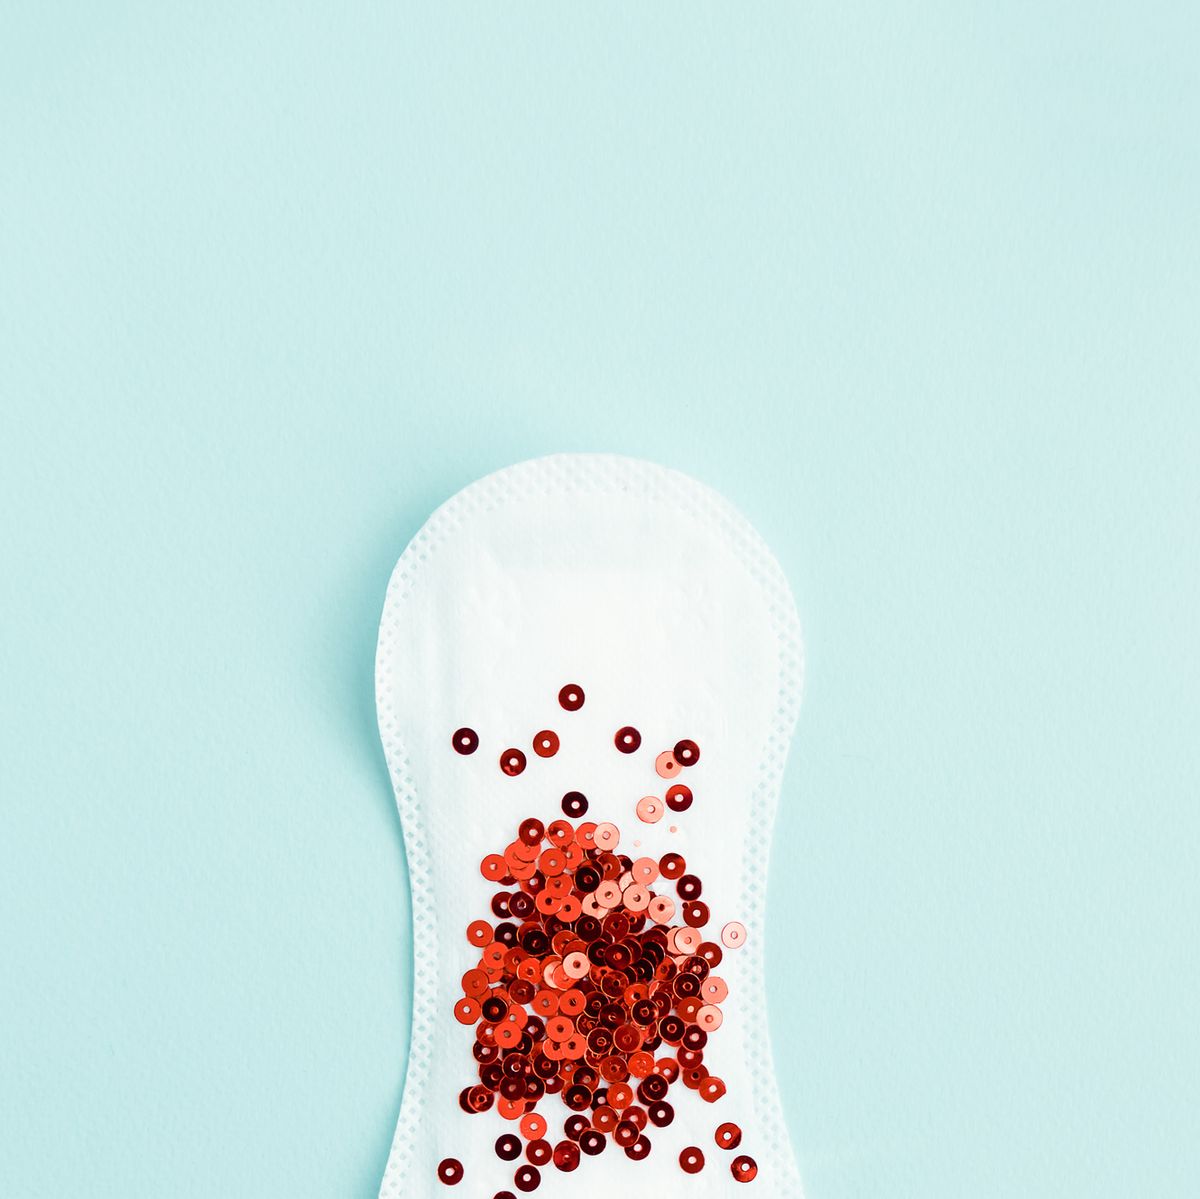 Nua, Worried about thick menstrual blood? Our period, just like us, comes  in all different shapes and sizes. Swipe on to know all about it in